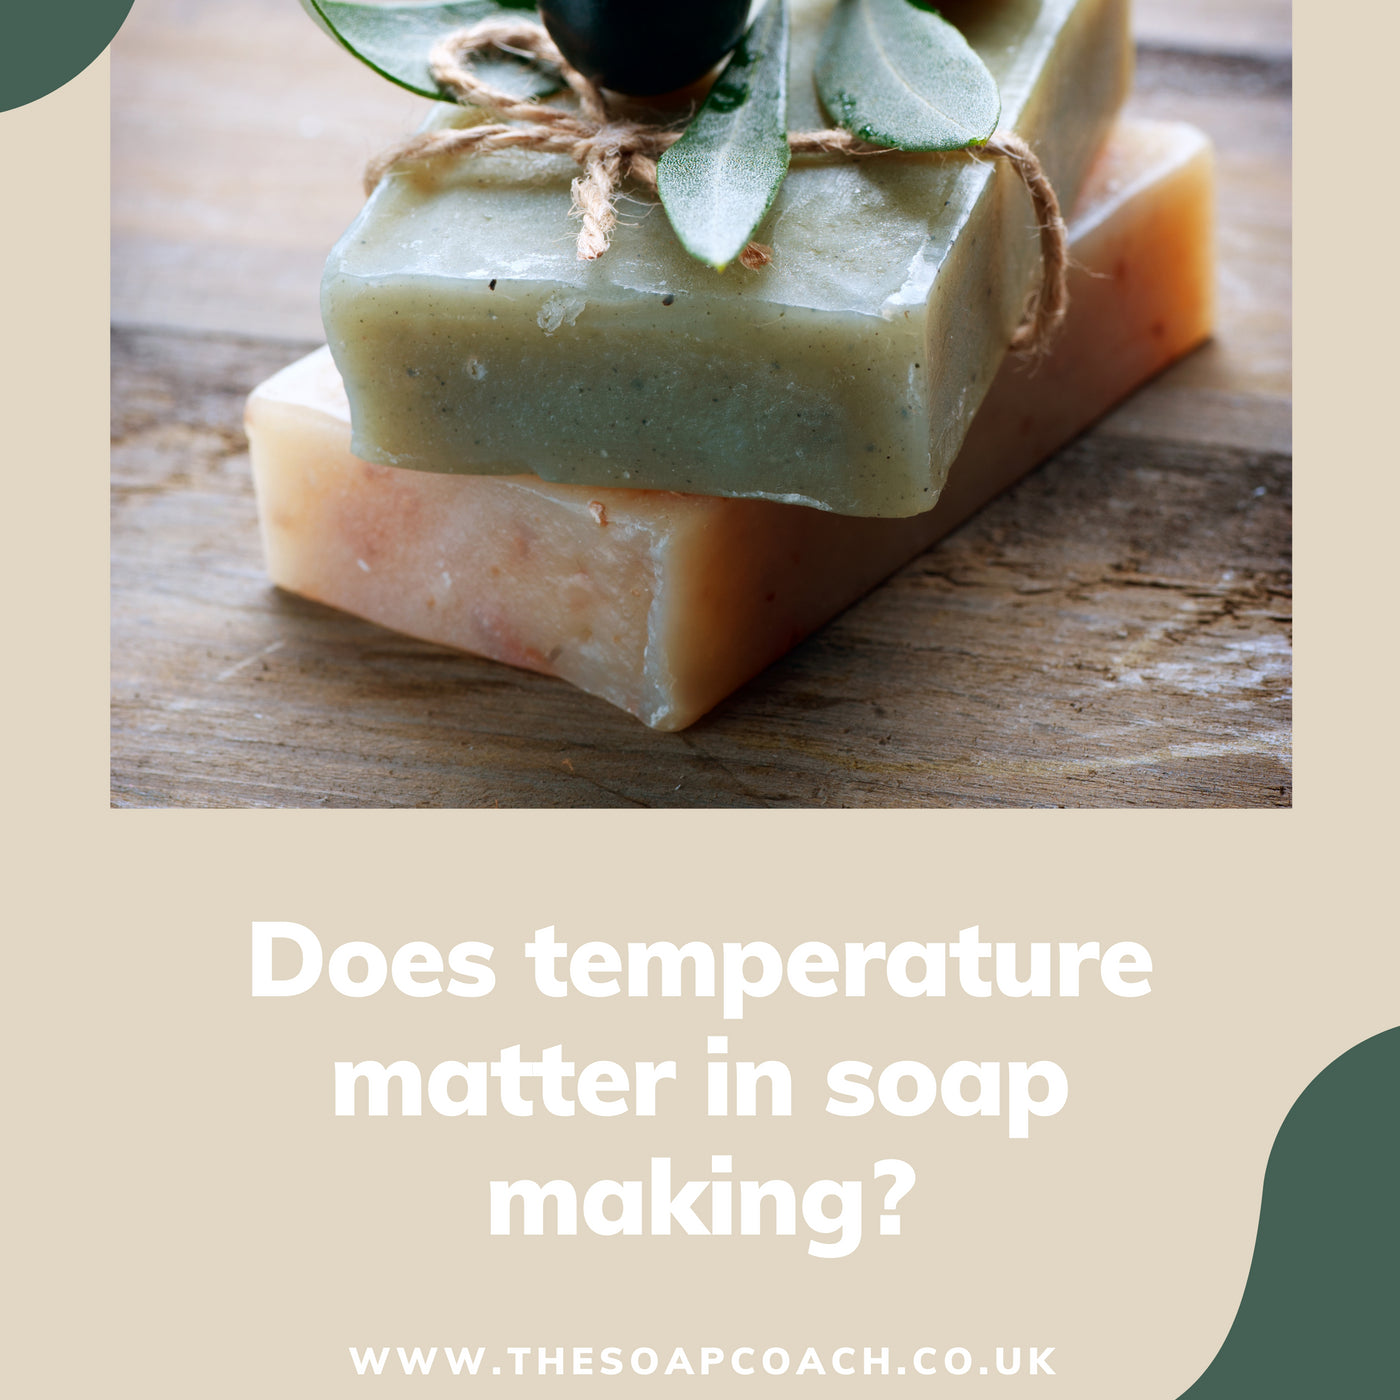 The 5 Methods of Soap Making